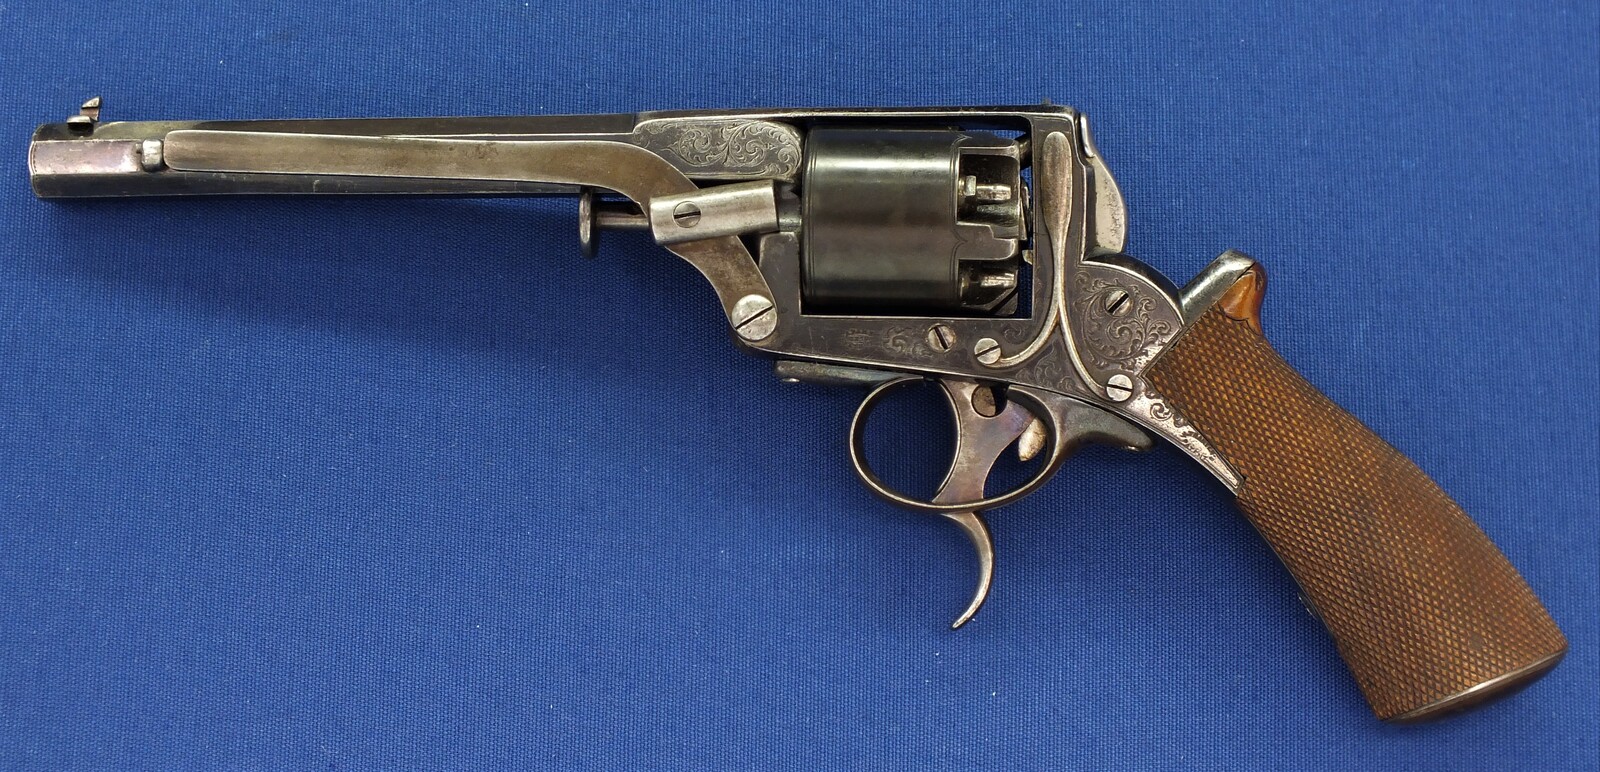 A very nice 19th century antique Dutch Adams Patent Tranter Double Action Percussion Revolver signed FABR. P. STEVENS TE MAASTRICHT and A.FRANCOTTE a LIEGE,  5 shot, caliber 11 mm, length 33,5 cm, in very good condition. Price 2.575 euro